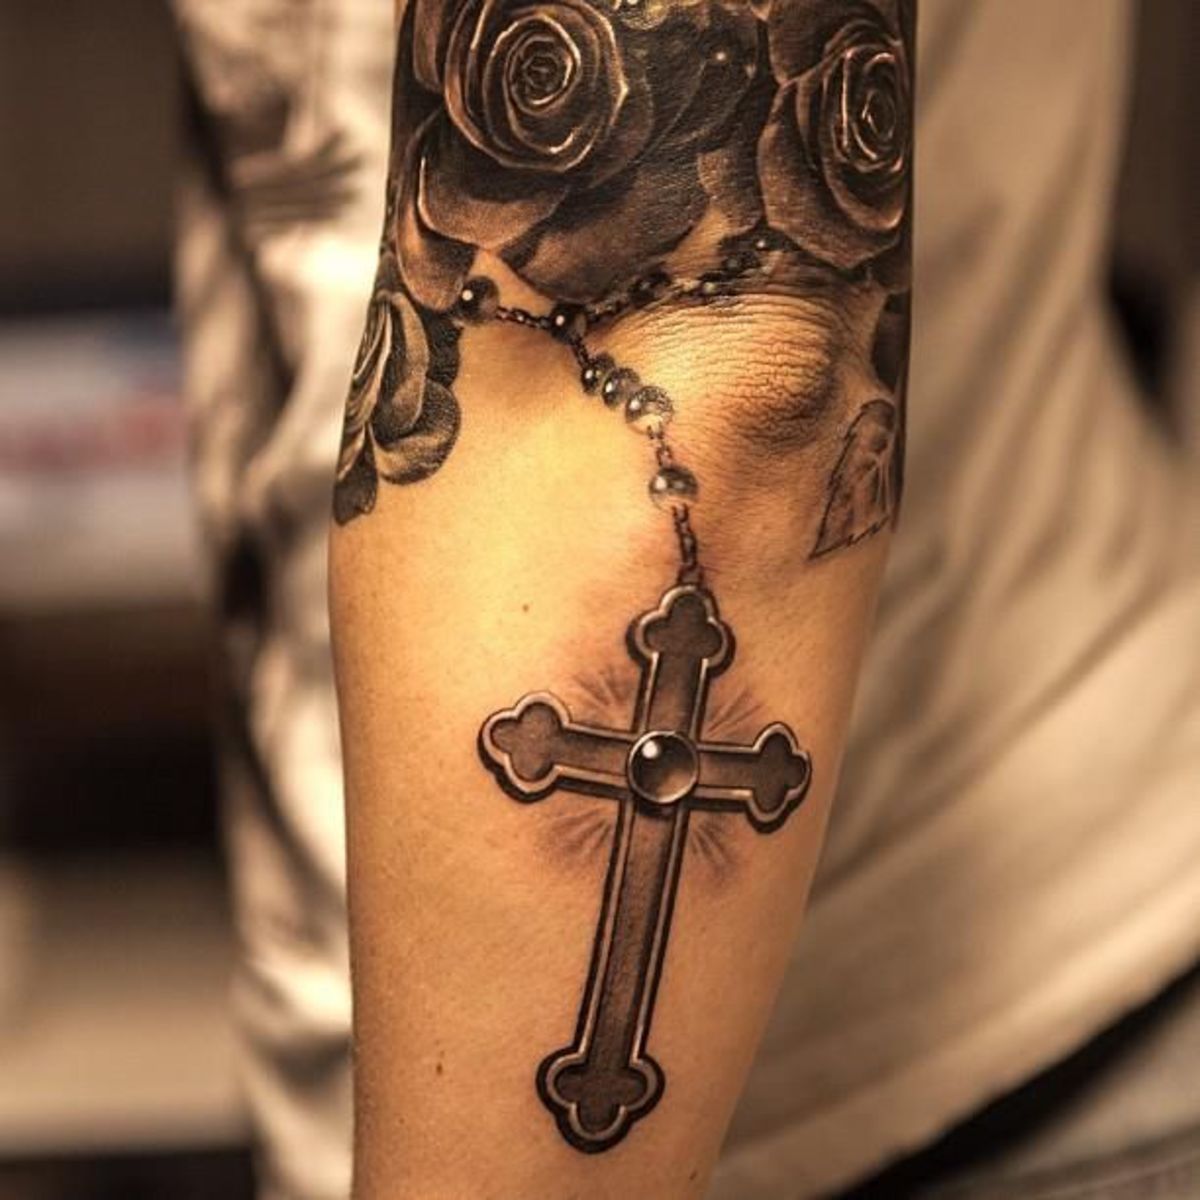 15 Christian Tattoos That People Will Definitely Have to Repent For -  RELEVANT